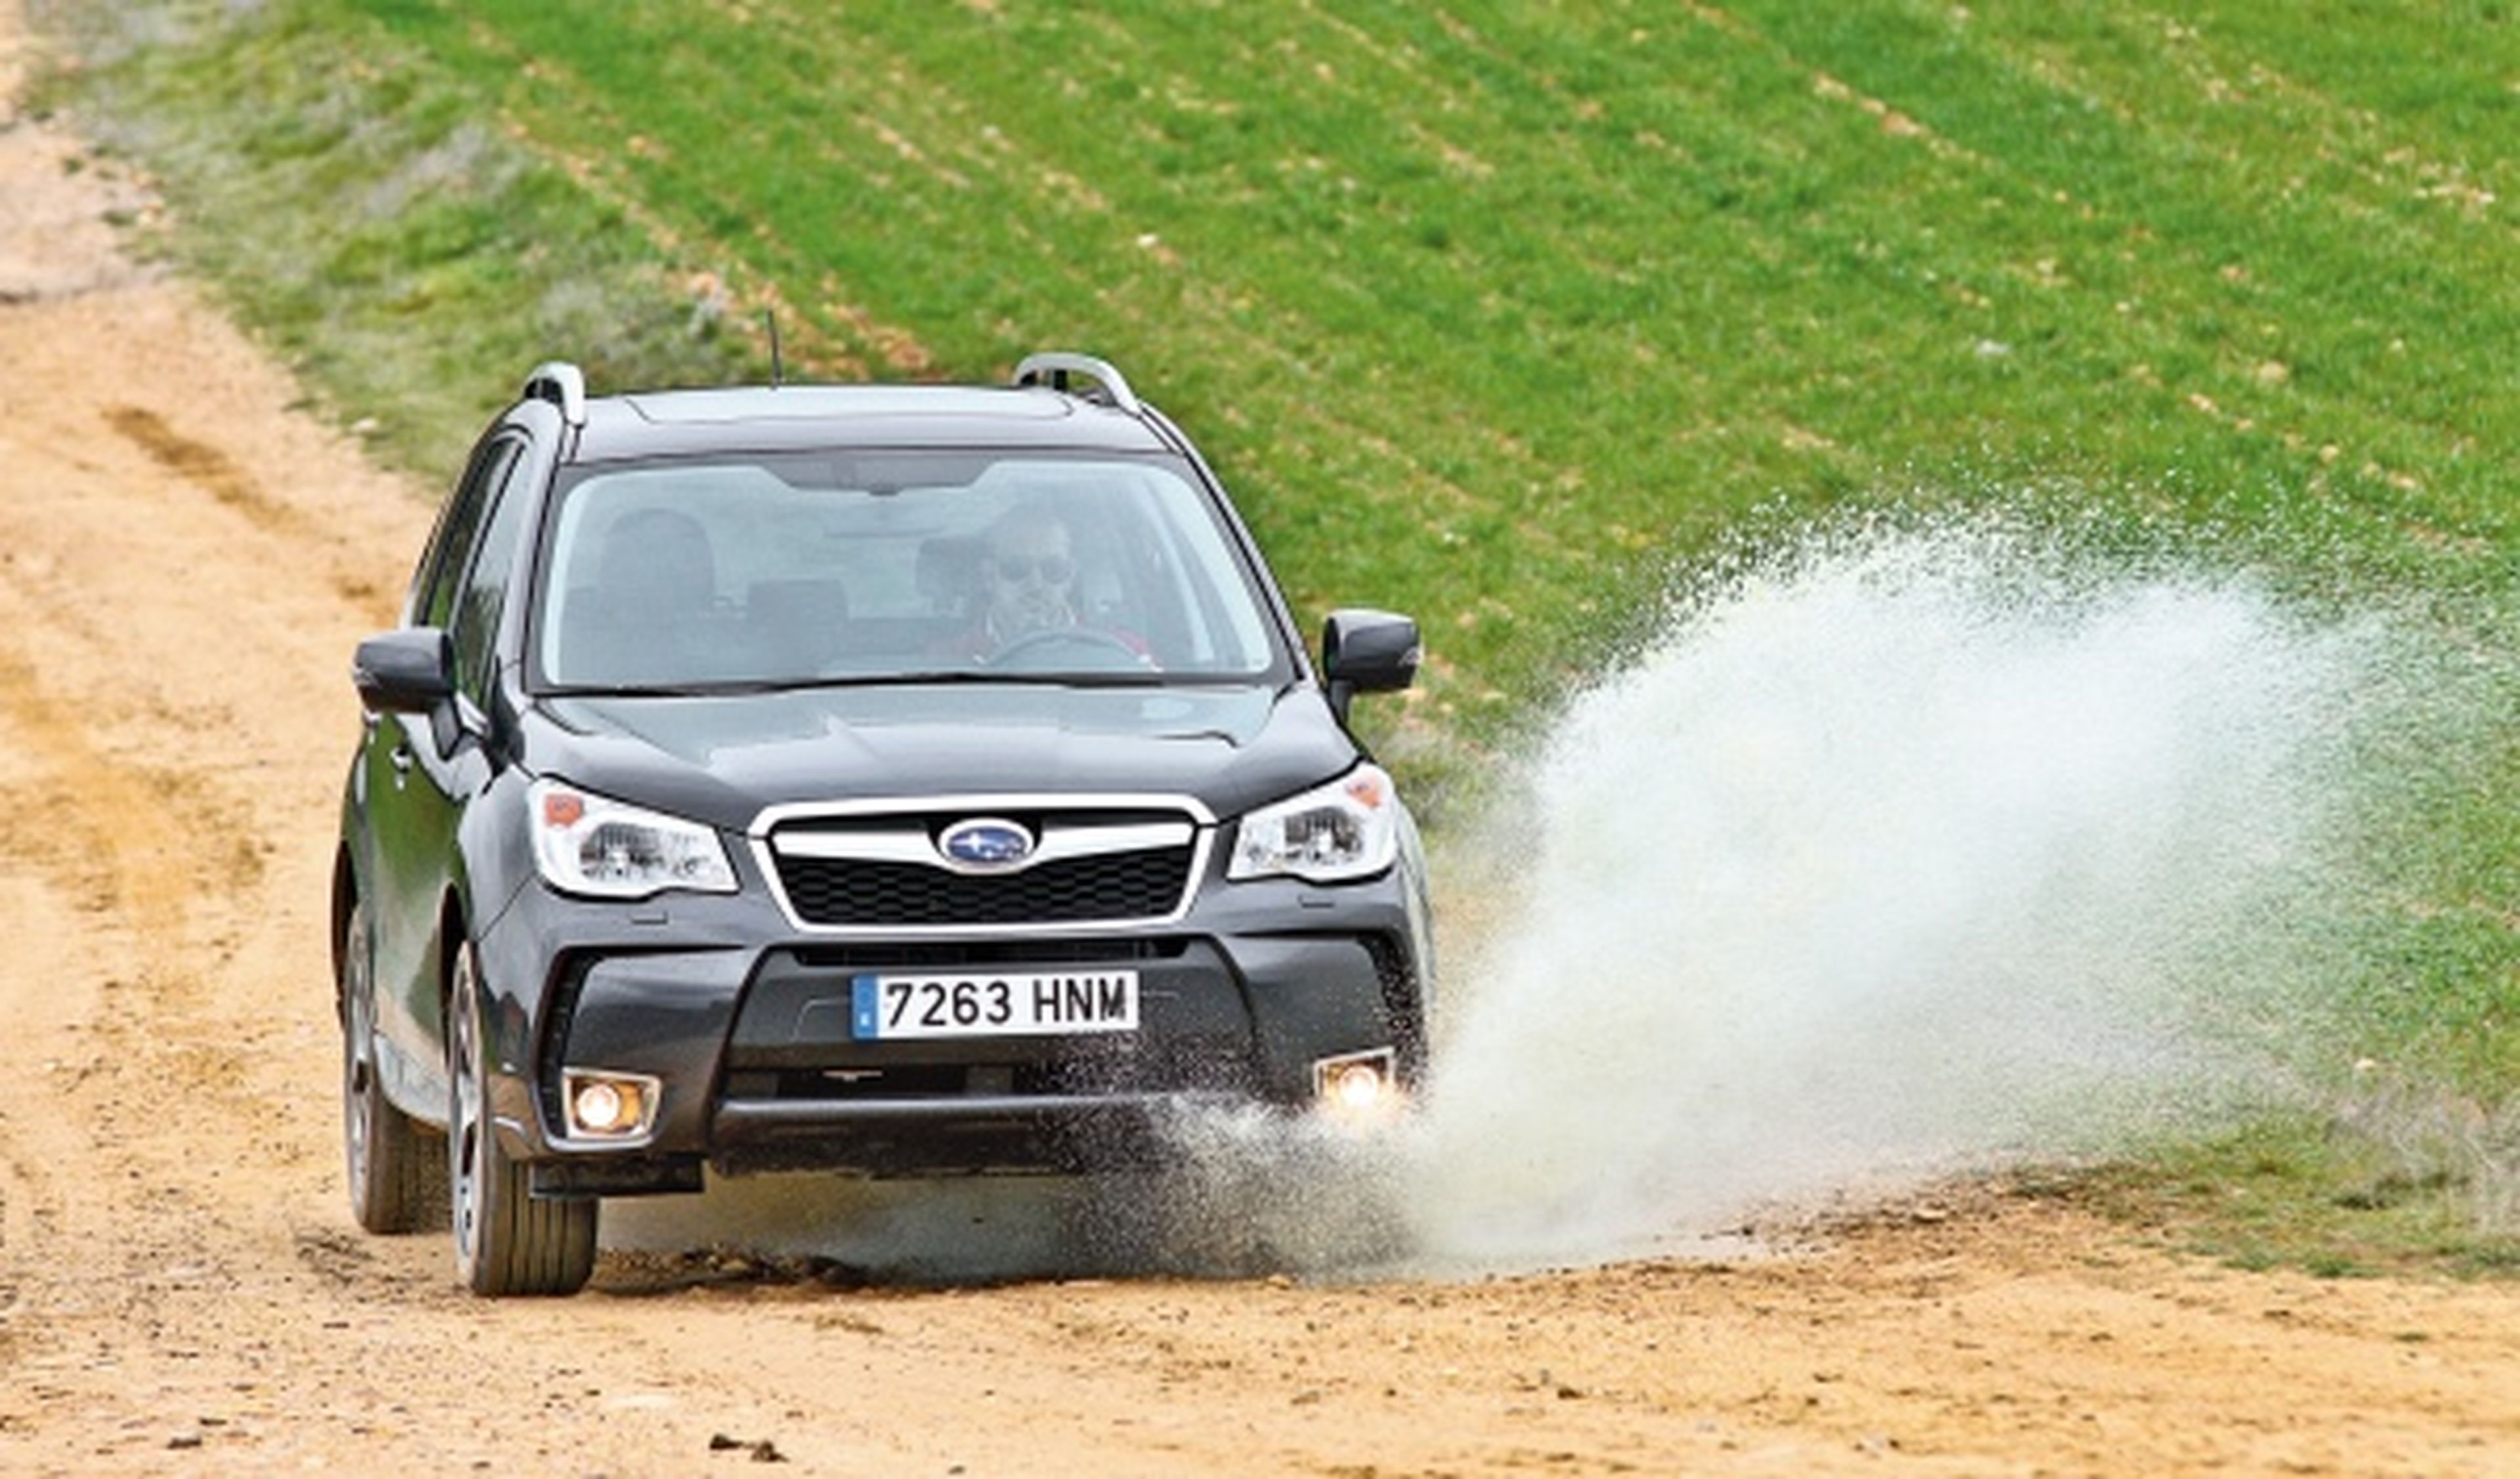 Subaru Forester 2013 frontal